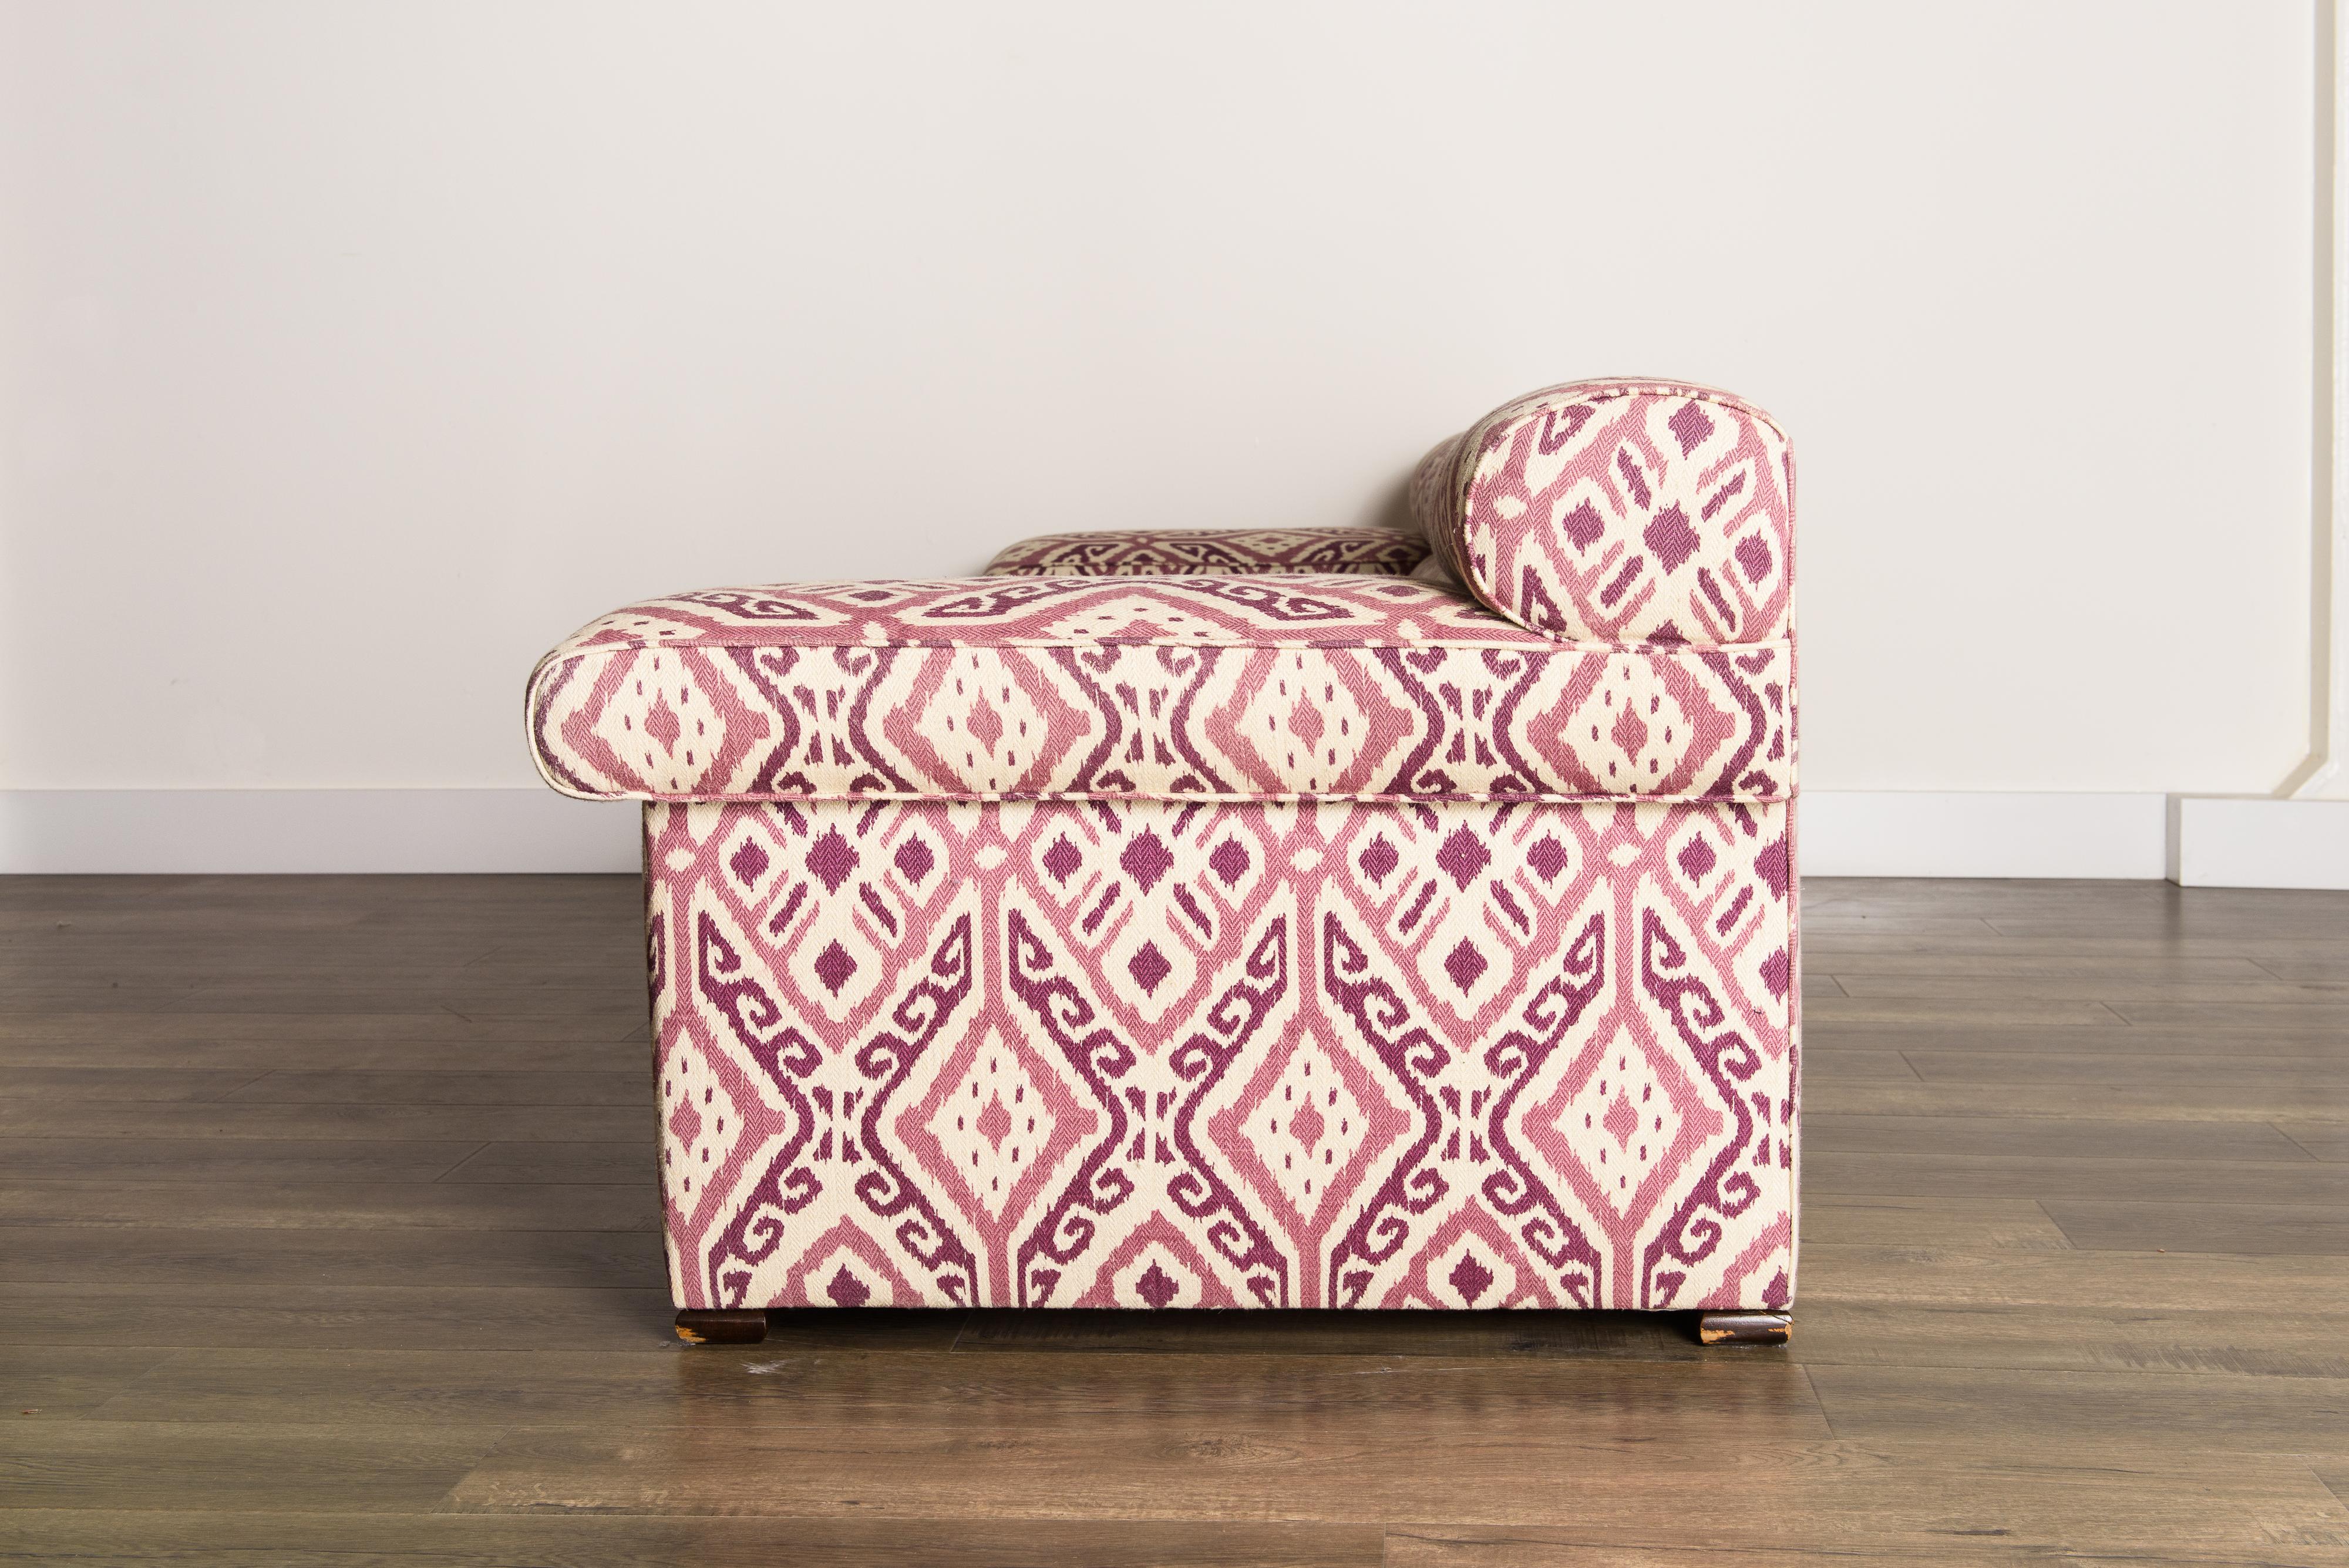 Paul Laszlo Attributed Curved Sectional Sofa Reupholstered in Pink Ikat Fabric For Sale 2